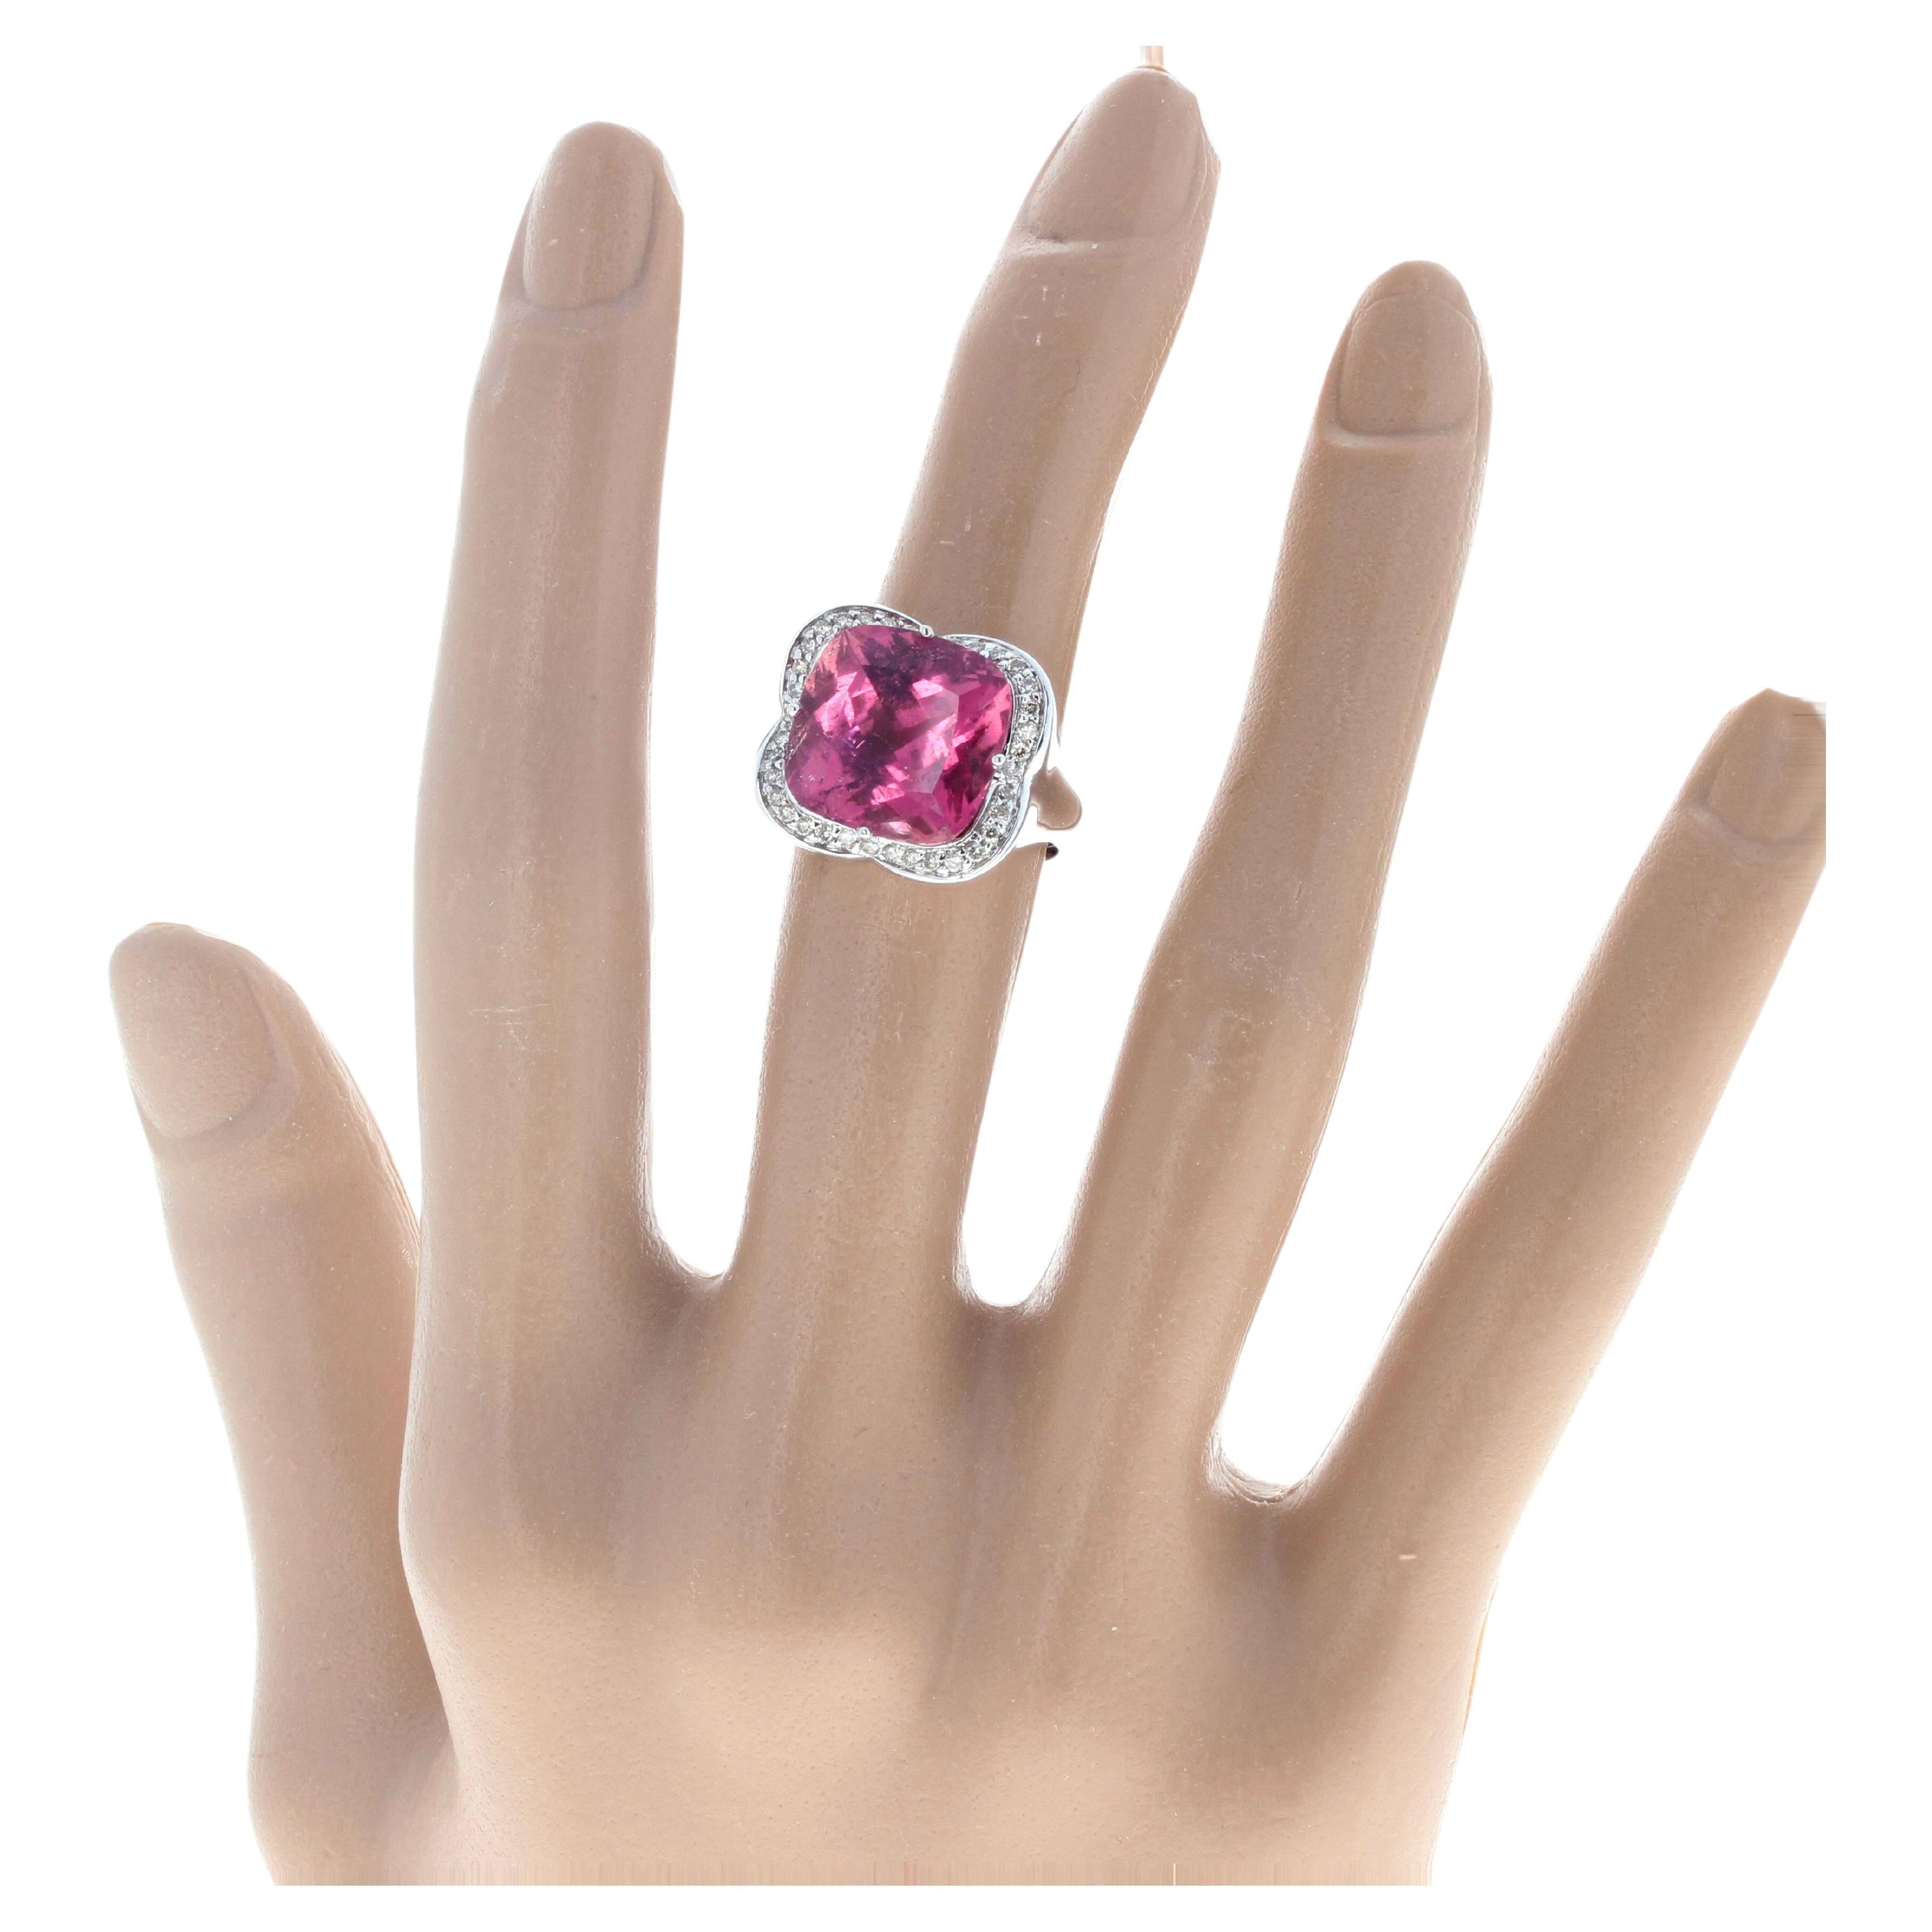 AJD Brilliant Clear Intense Pinkyred Natural 11.46 Ct Tourmaline & Diamonds Ring